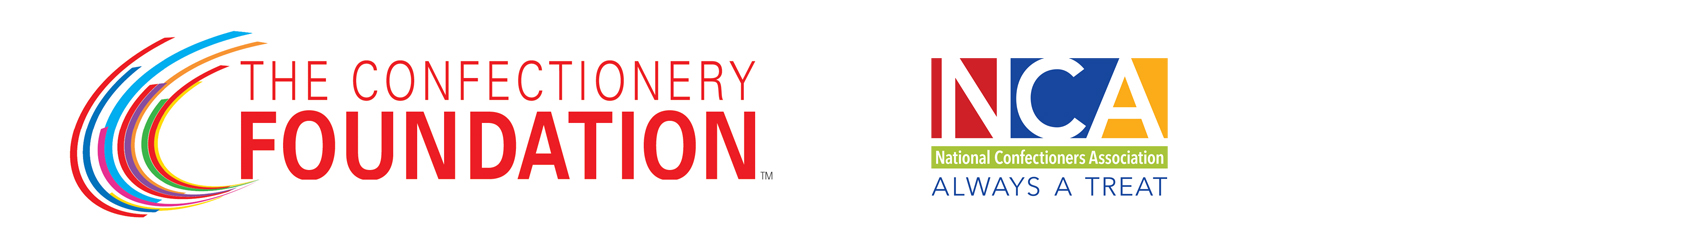 NCA and The Confectionery Foundation logos